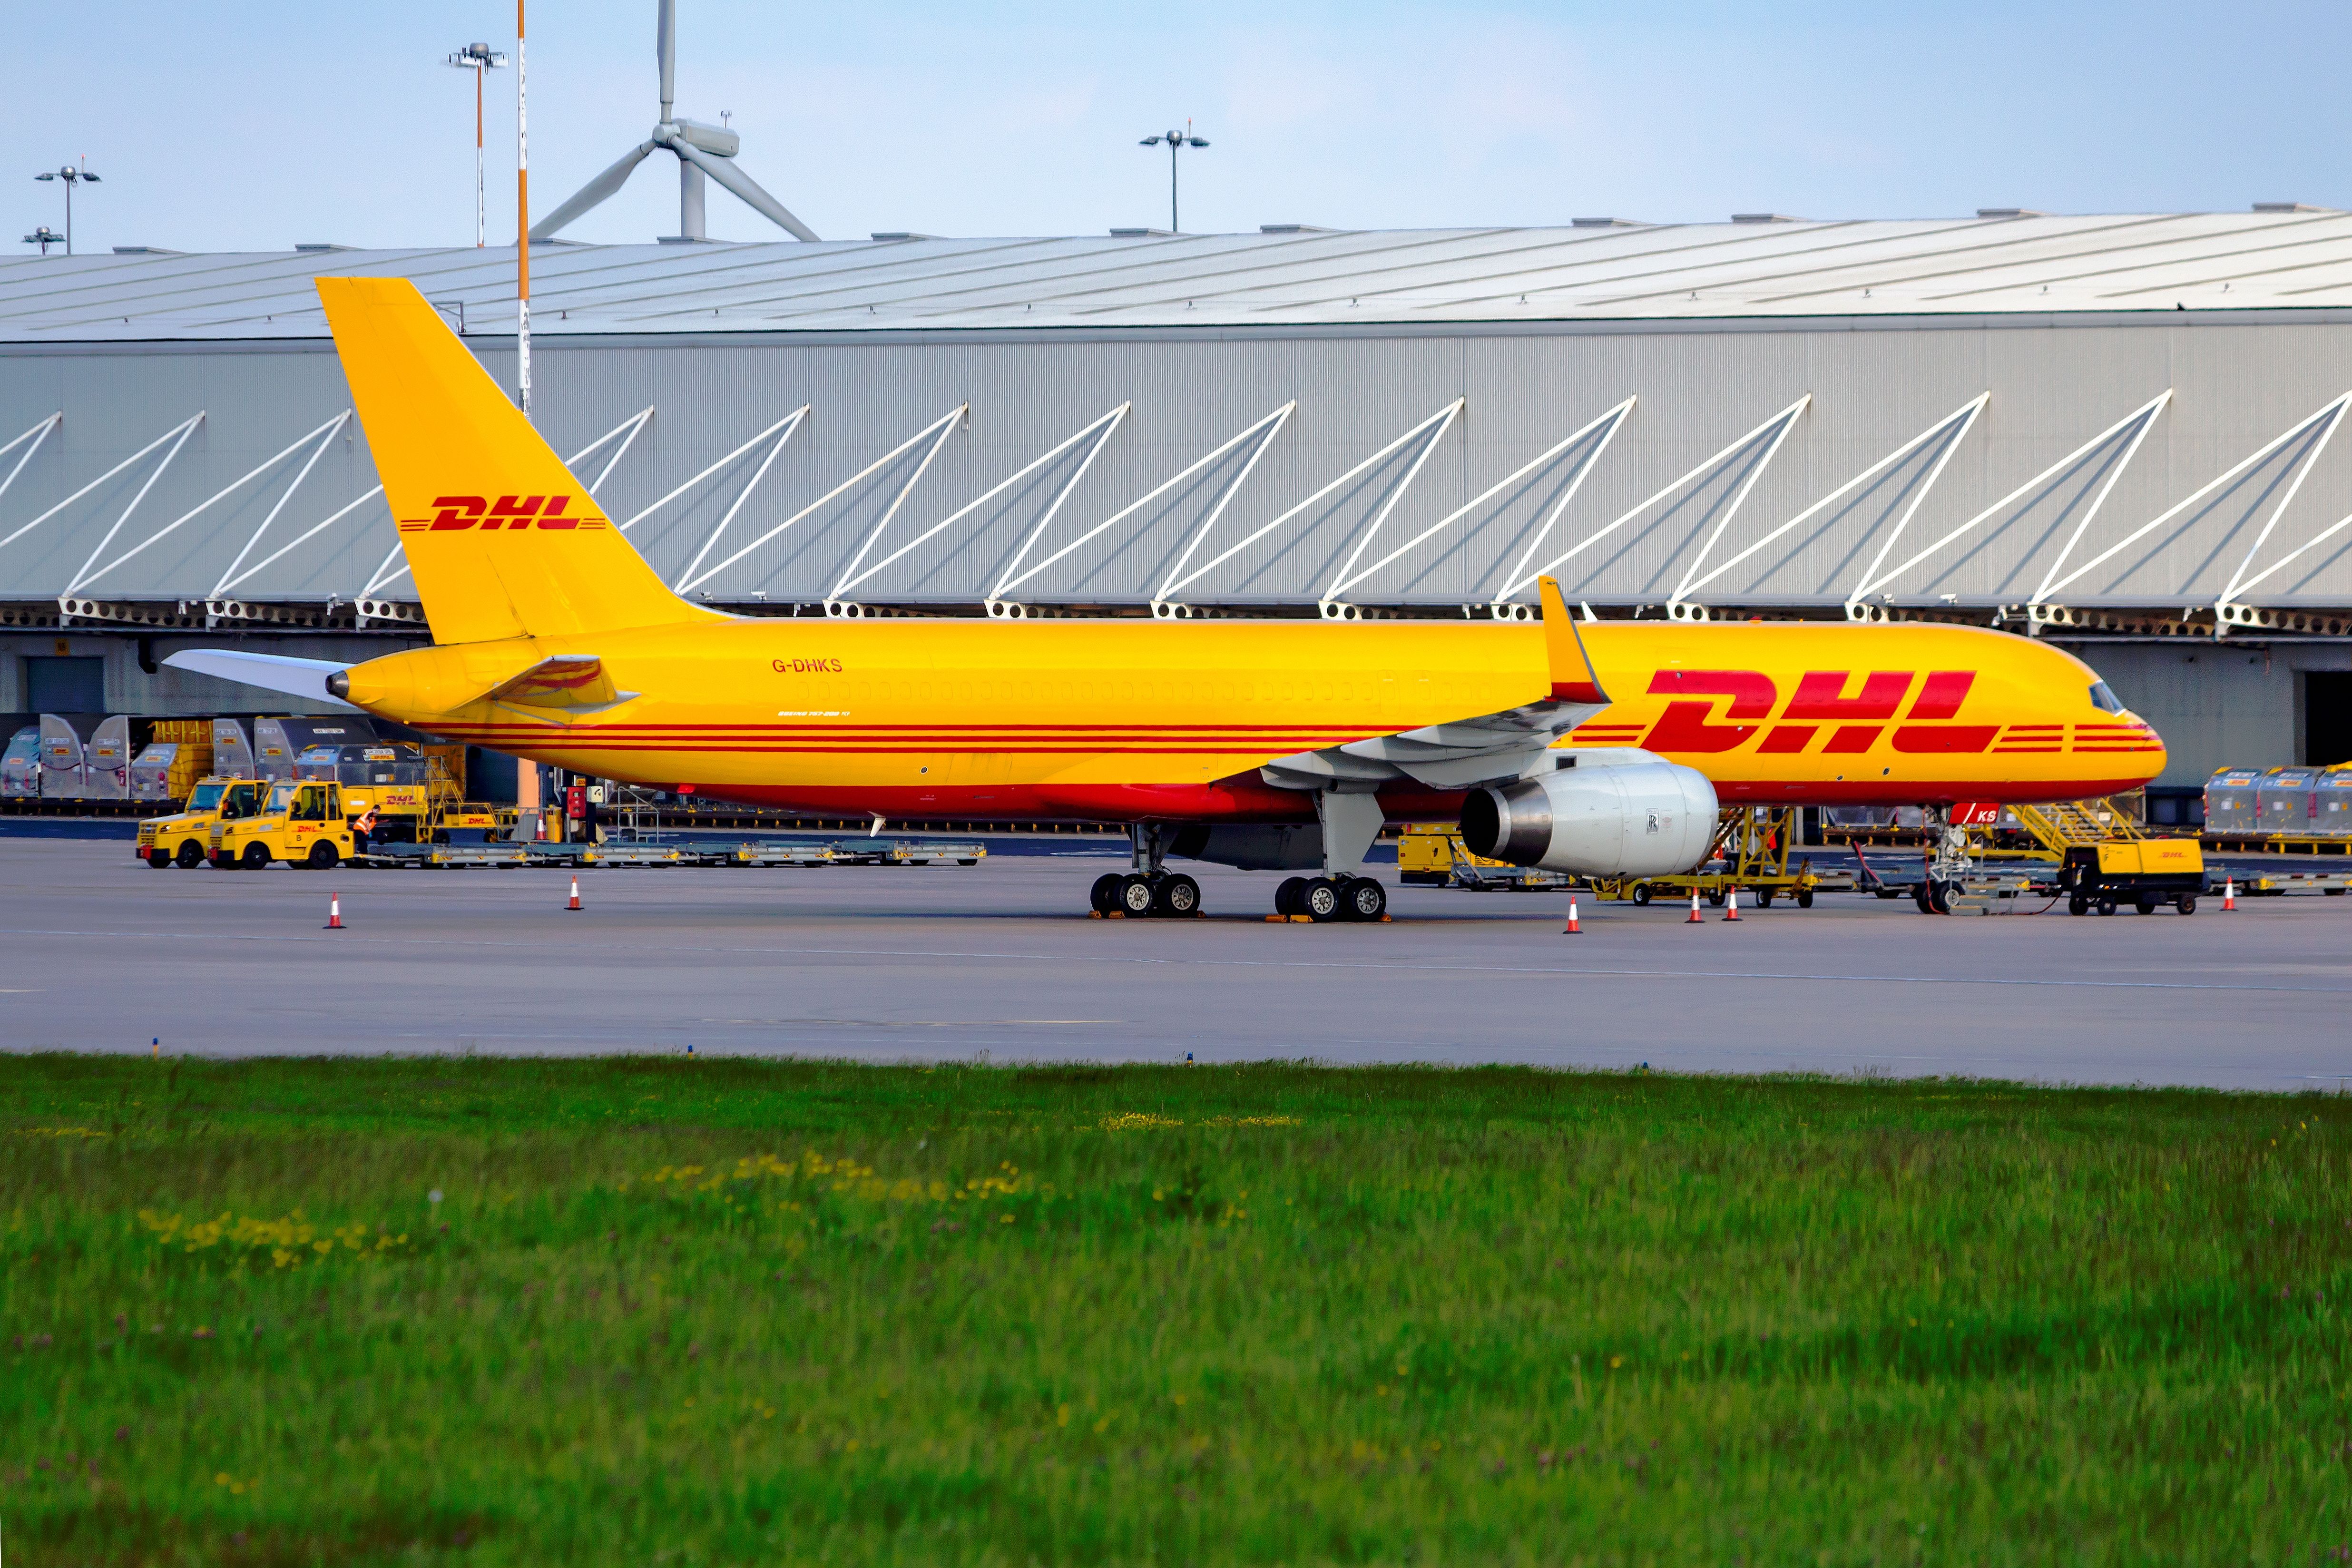 DHL's Boeing 757F at East Midlands Airport